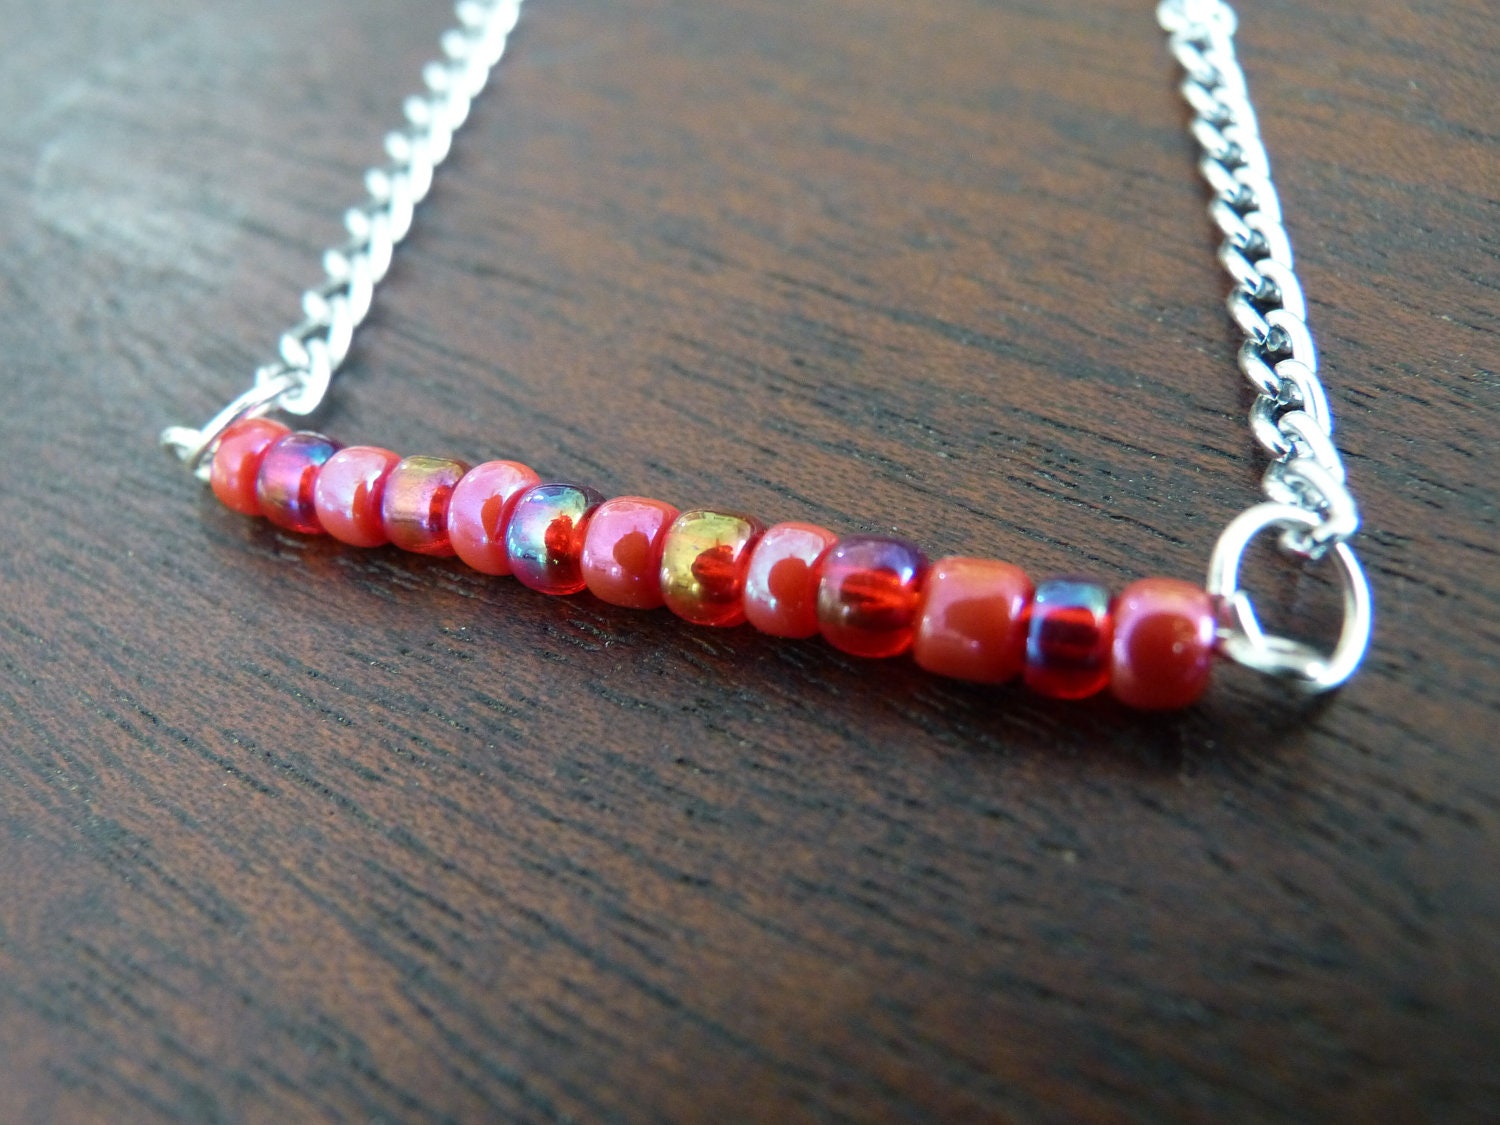 Beaded bar necklace